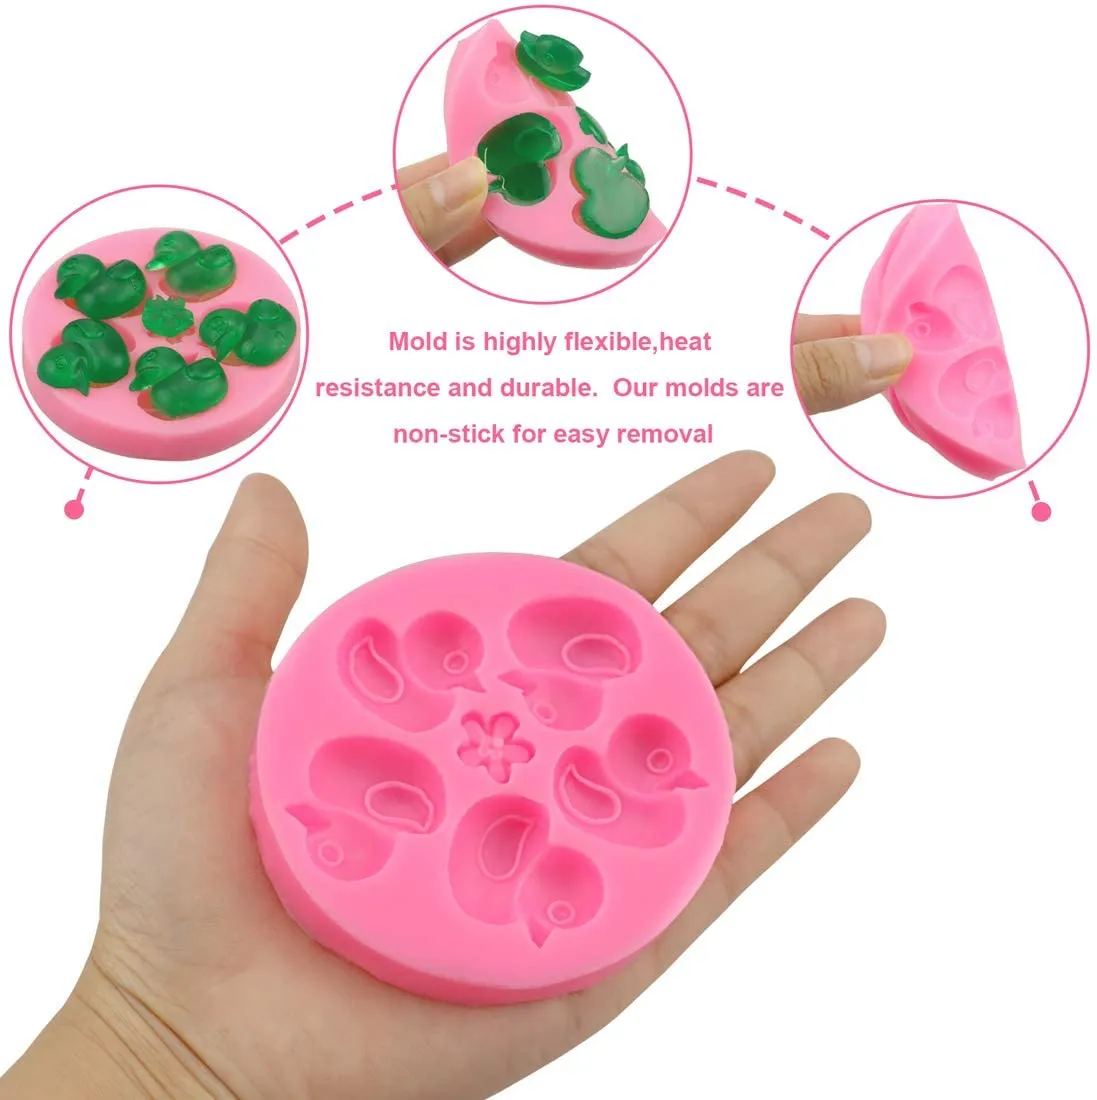 5 Cavity Fondant Buck Silicone Pink Mold On Food Food Grade For Candy, Cake  Decoration, And Jewelry Making 1222258 From Vitic_shop, $1.51